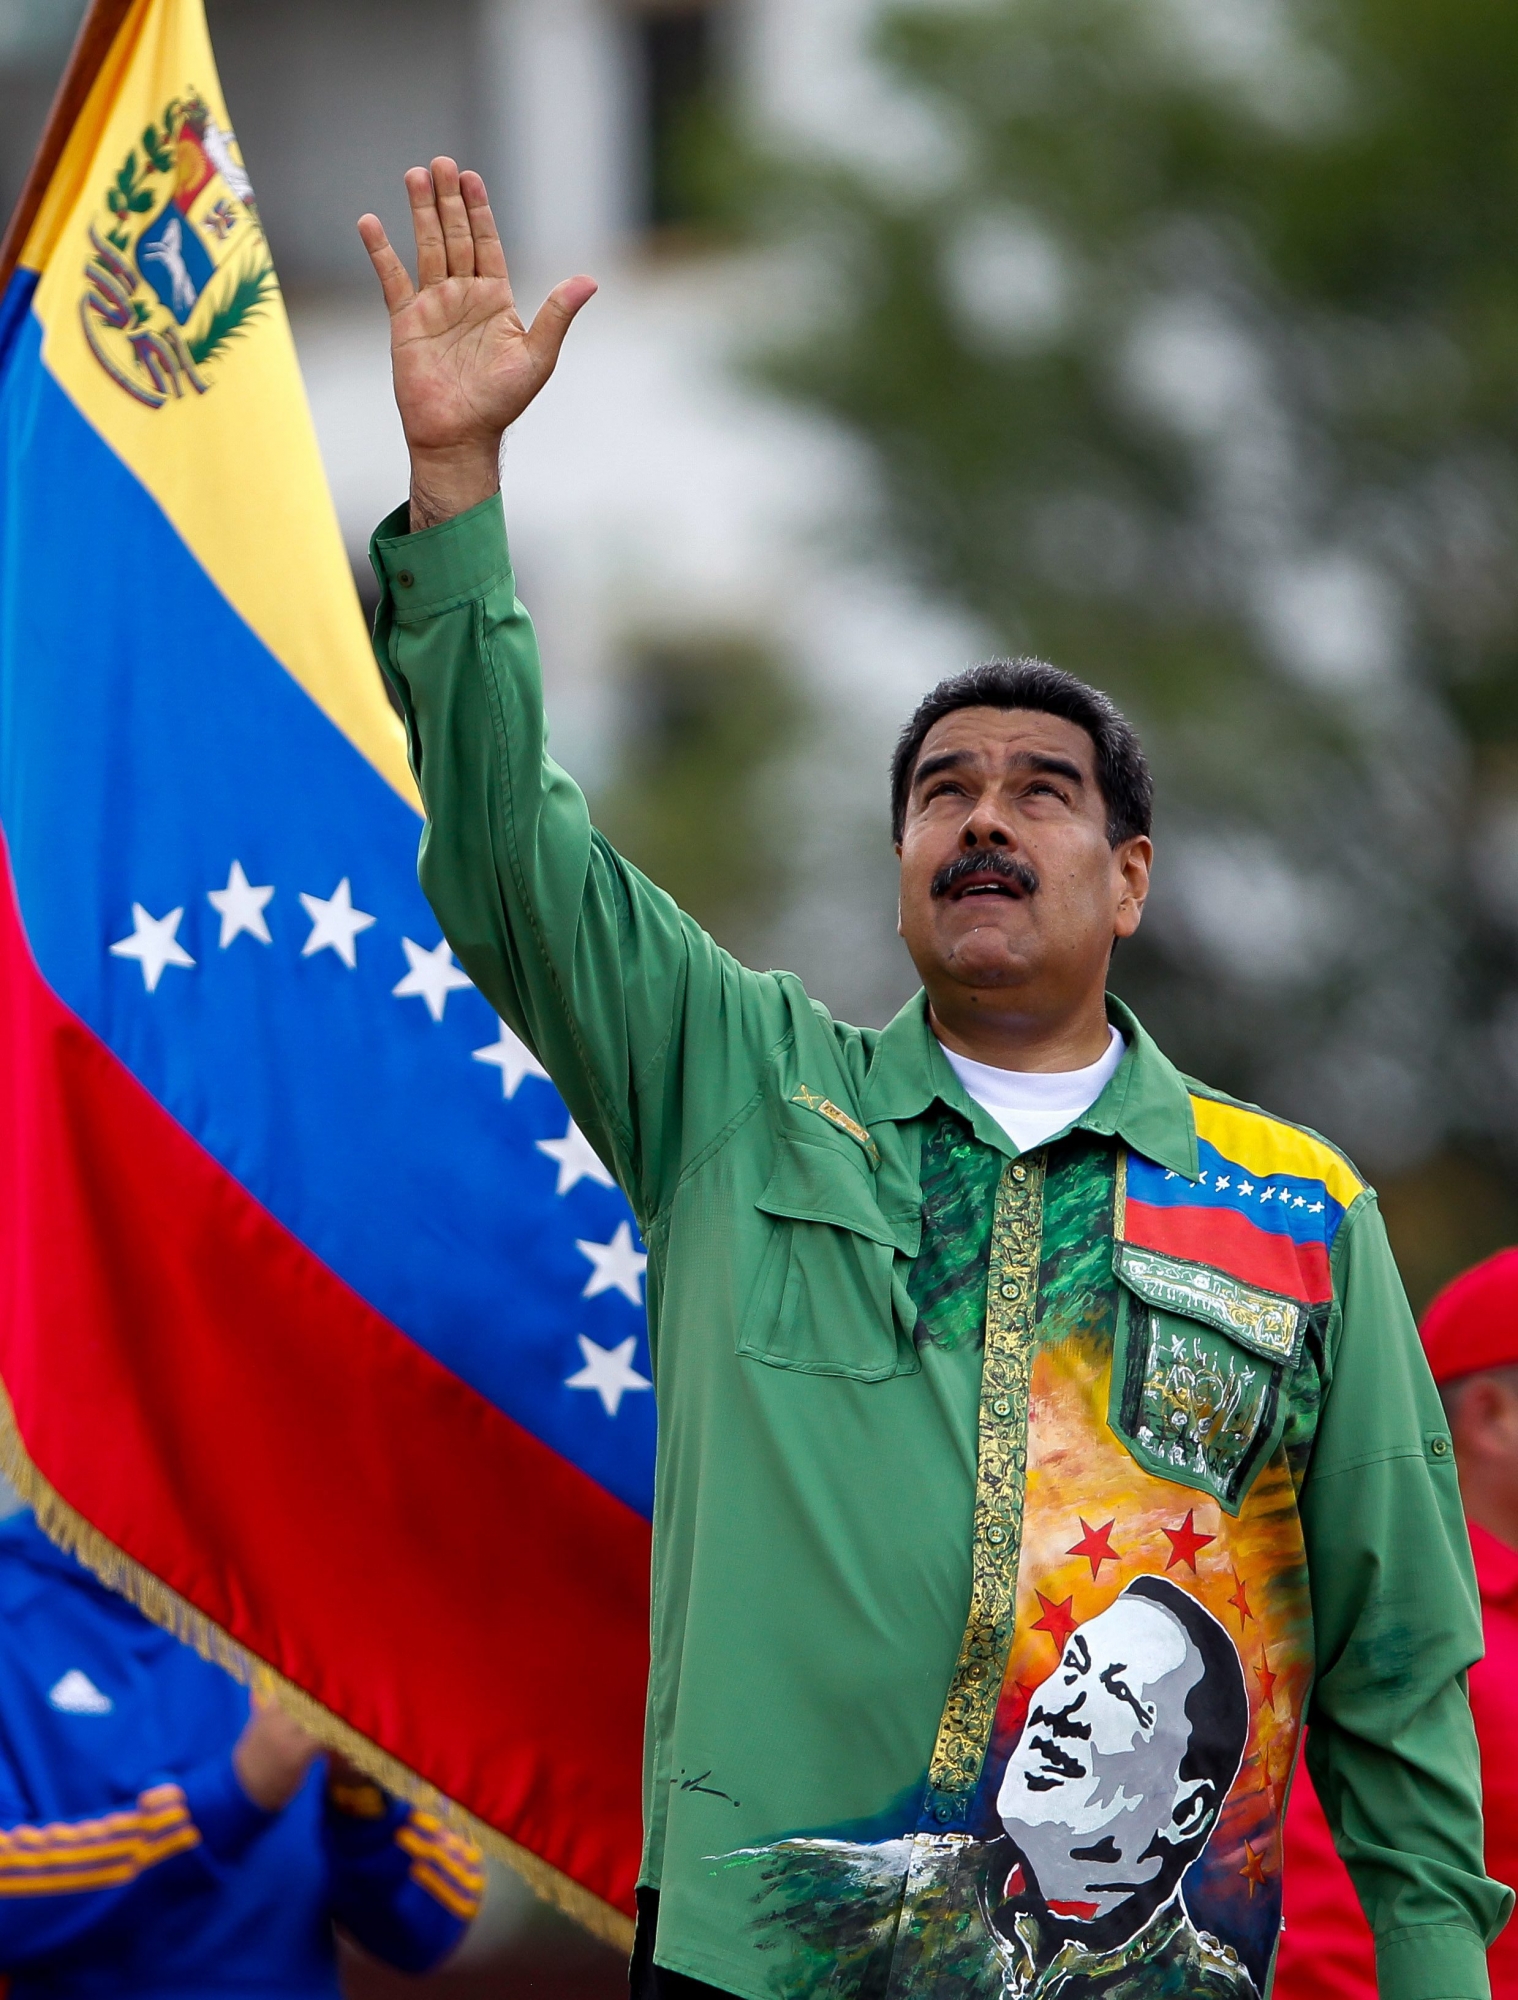 epa06745850 Venezuelan President Nicolas Maduro waves during the close of campaign in Caracas, Venezuela, on 17 May 2018. Maduro close his campaign with the promise to solve the economic crisis of the country. The presidential election is set for 20 May.  EPA/Cristian Hernandez VENEZUELA ELECTIONS